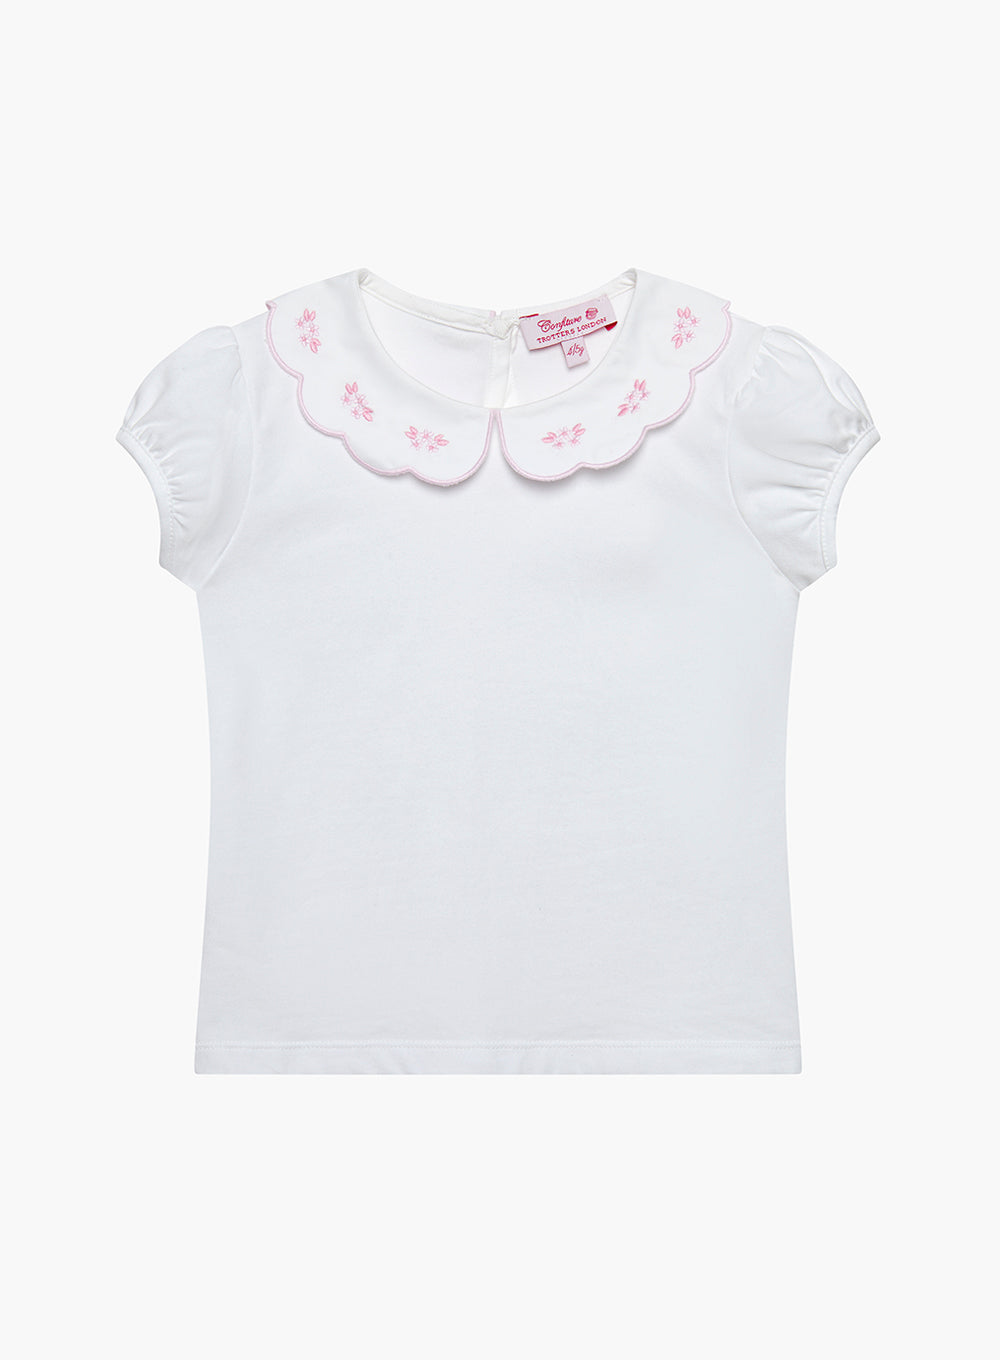 Ava Embroidered Petal Jersey Top in White/Pink